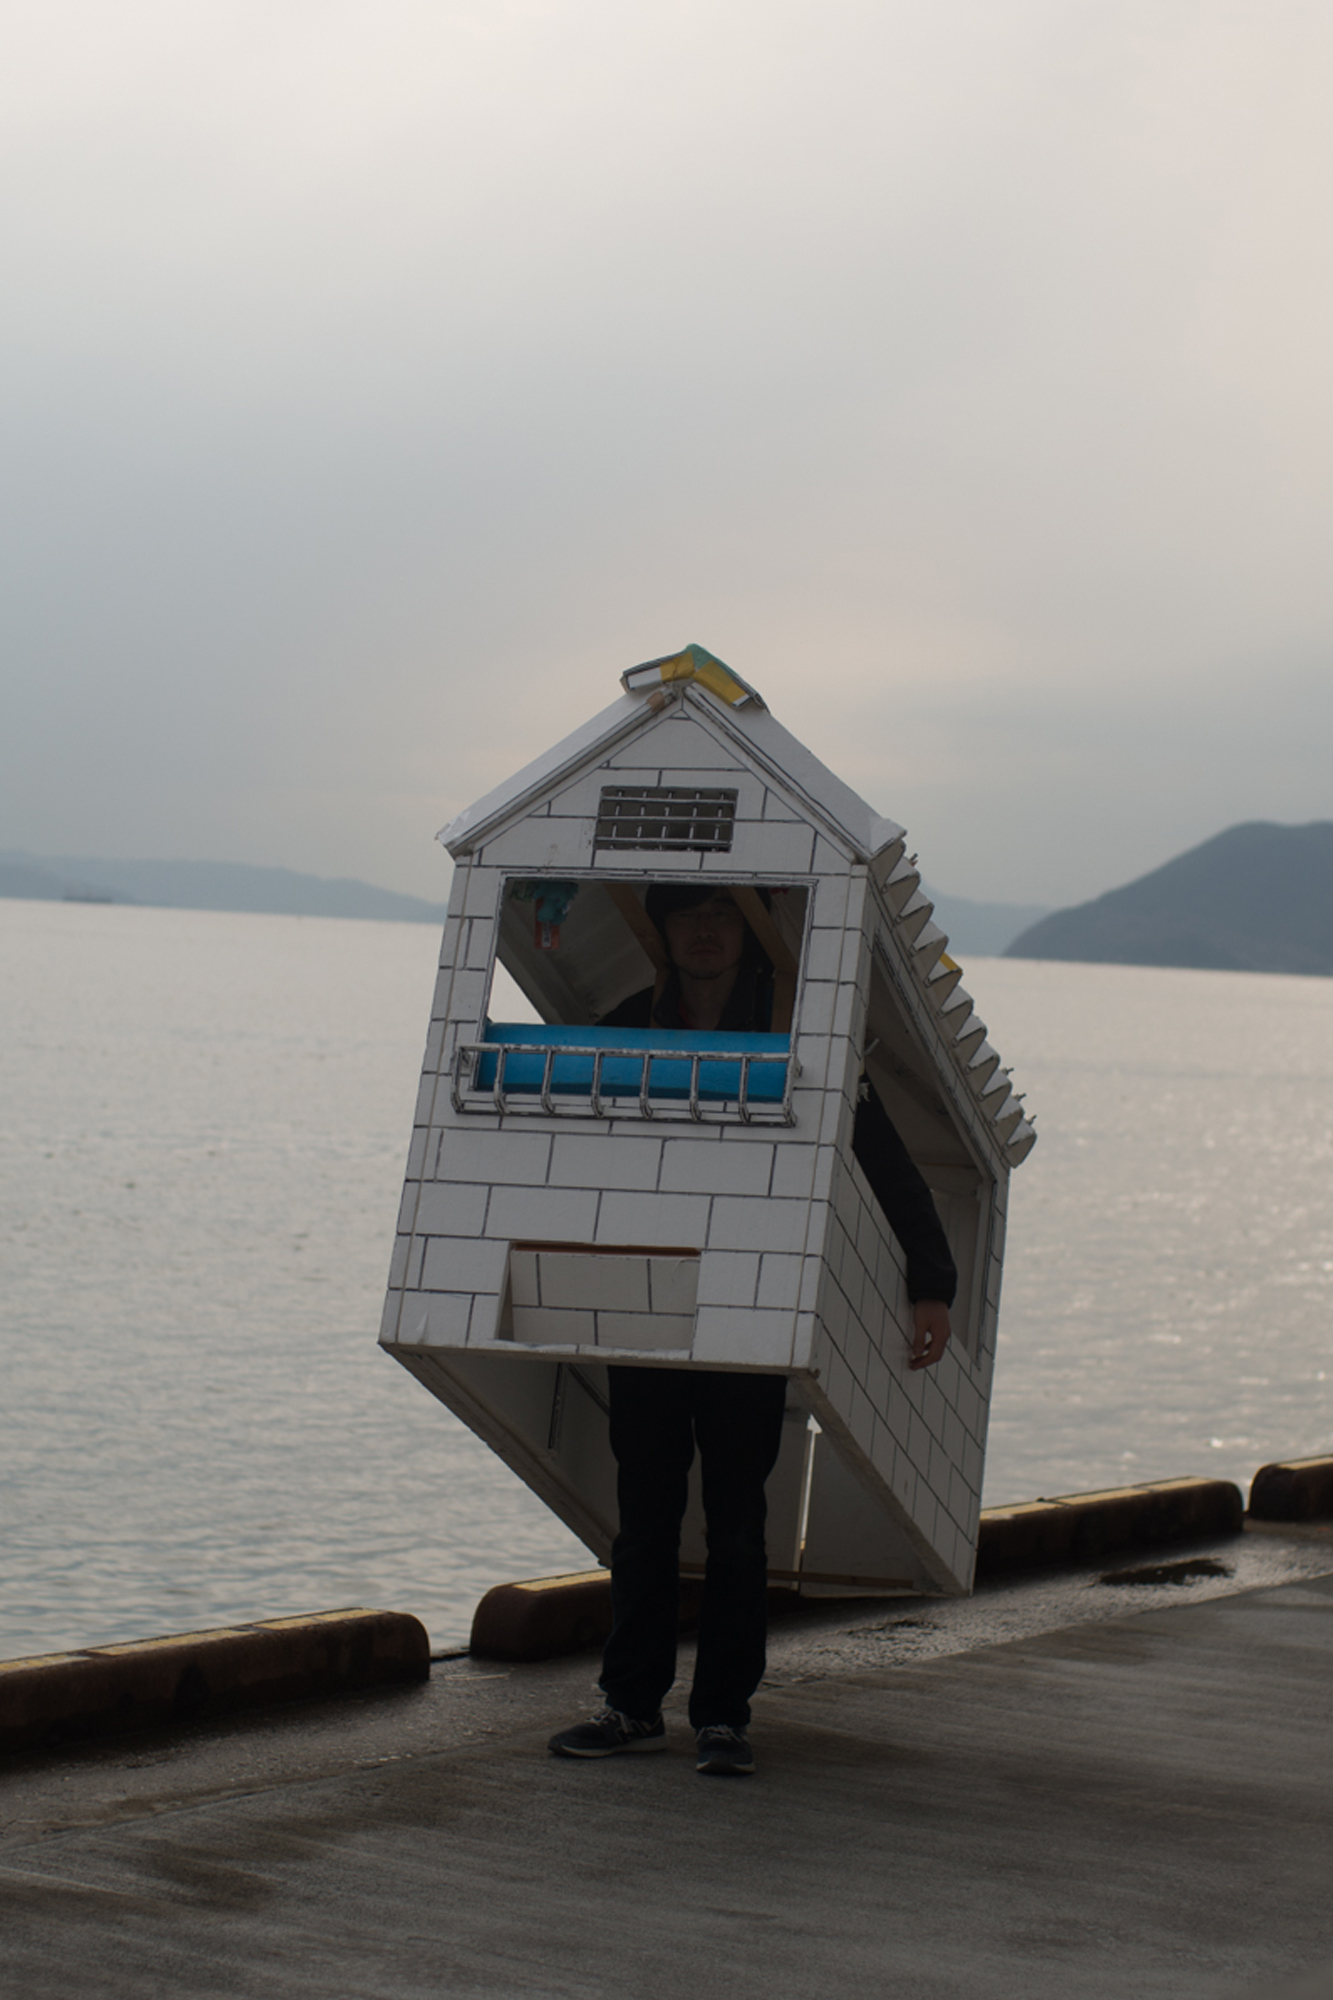 ¬Japanese artist Satoshi Murakami and his work titled ‘Migratory Life’ showcasing alternative ways of living | Japanese man wearing portable Styrofoam ‘house’ in front of the ocean | Japanese house | Tokyo | Japanese art | Japanese artists | Written by Grace Lovell and Yoshi Tsujimura Photography by Yoshi Tsujimura | edited by Sophie Rzepecky